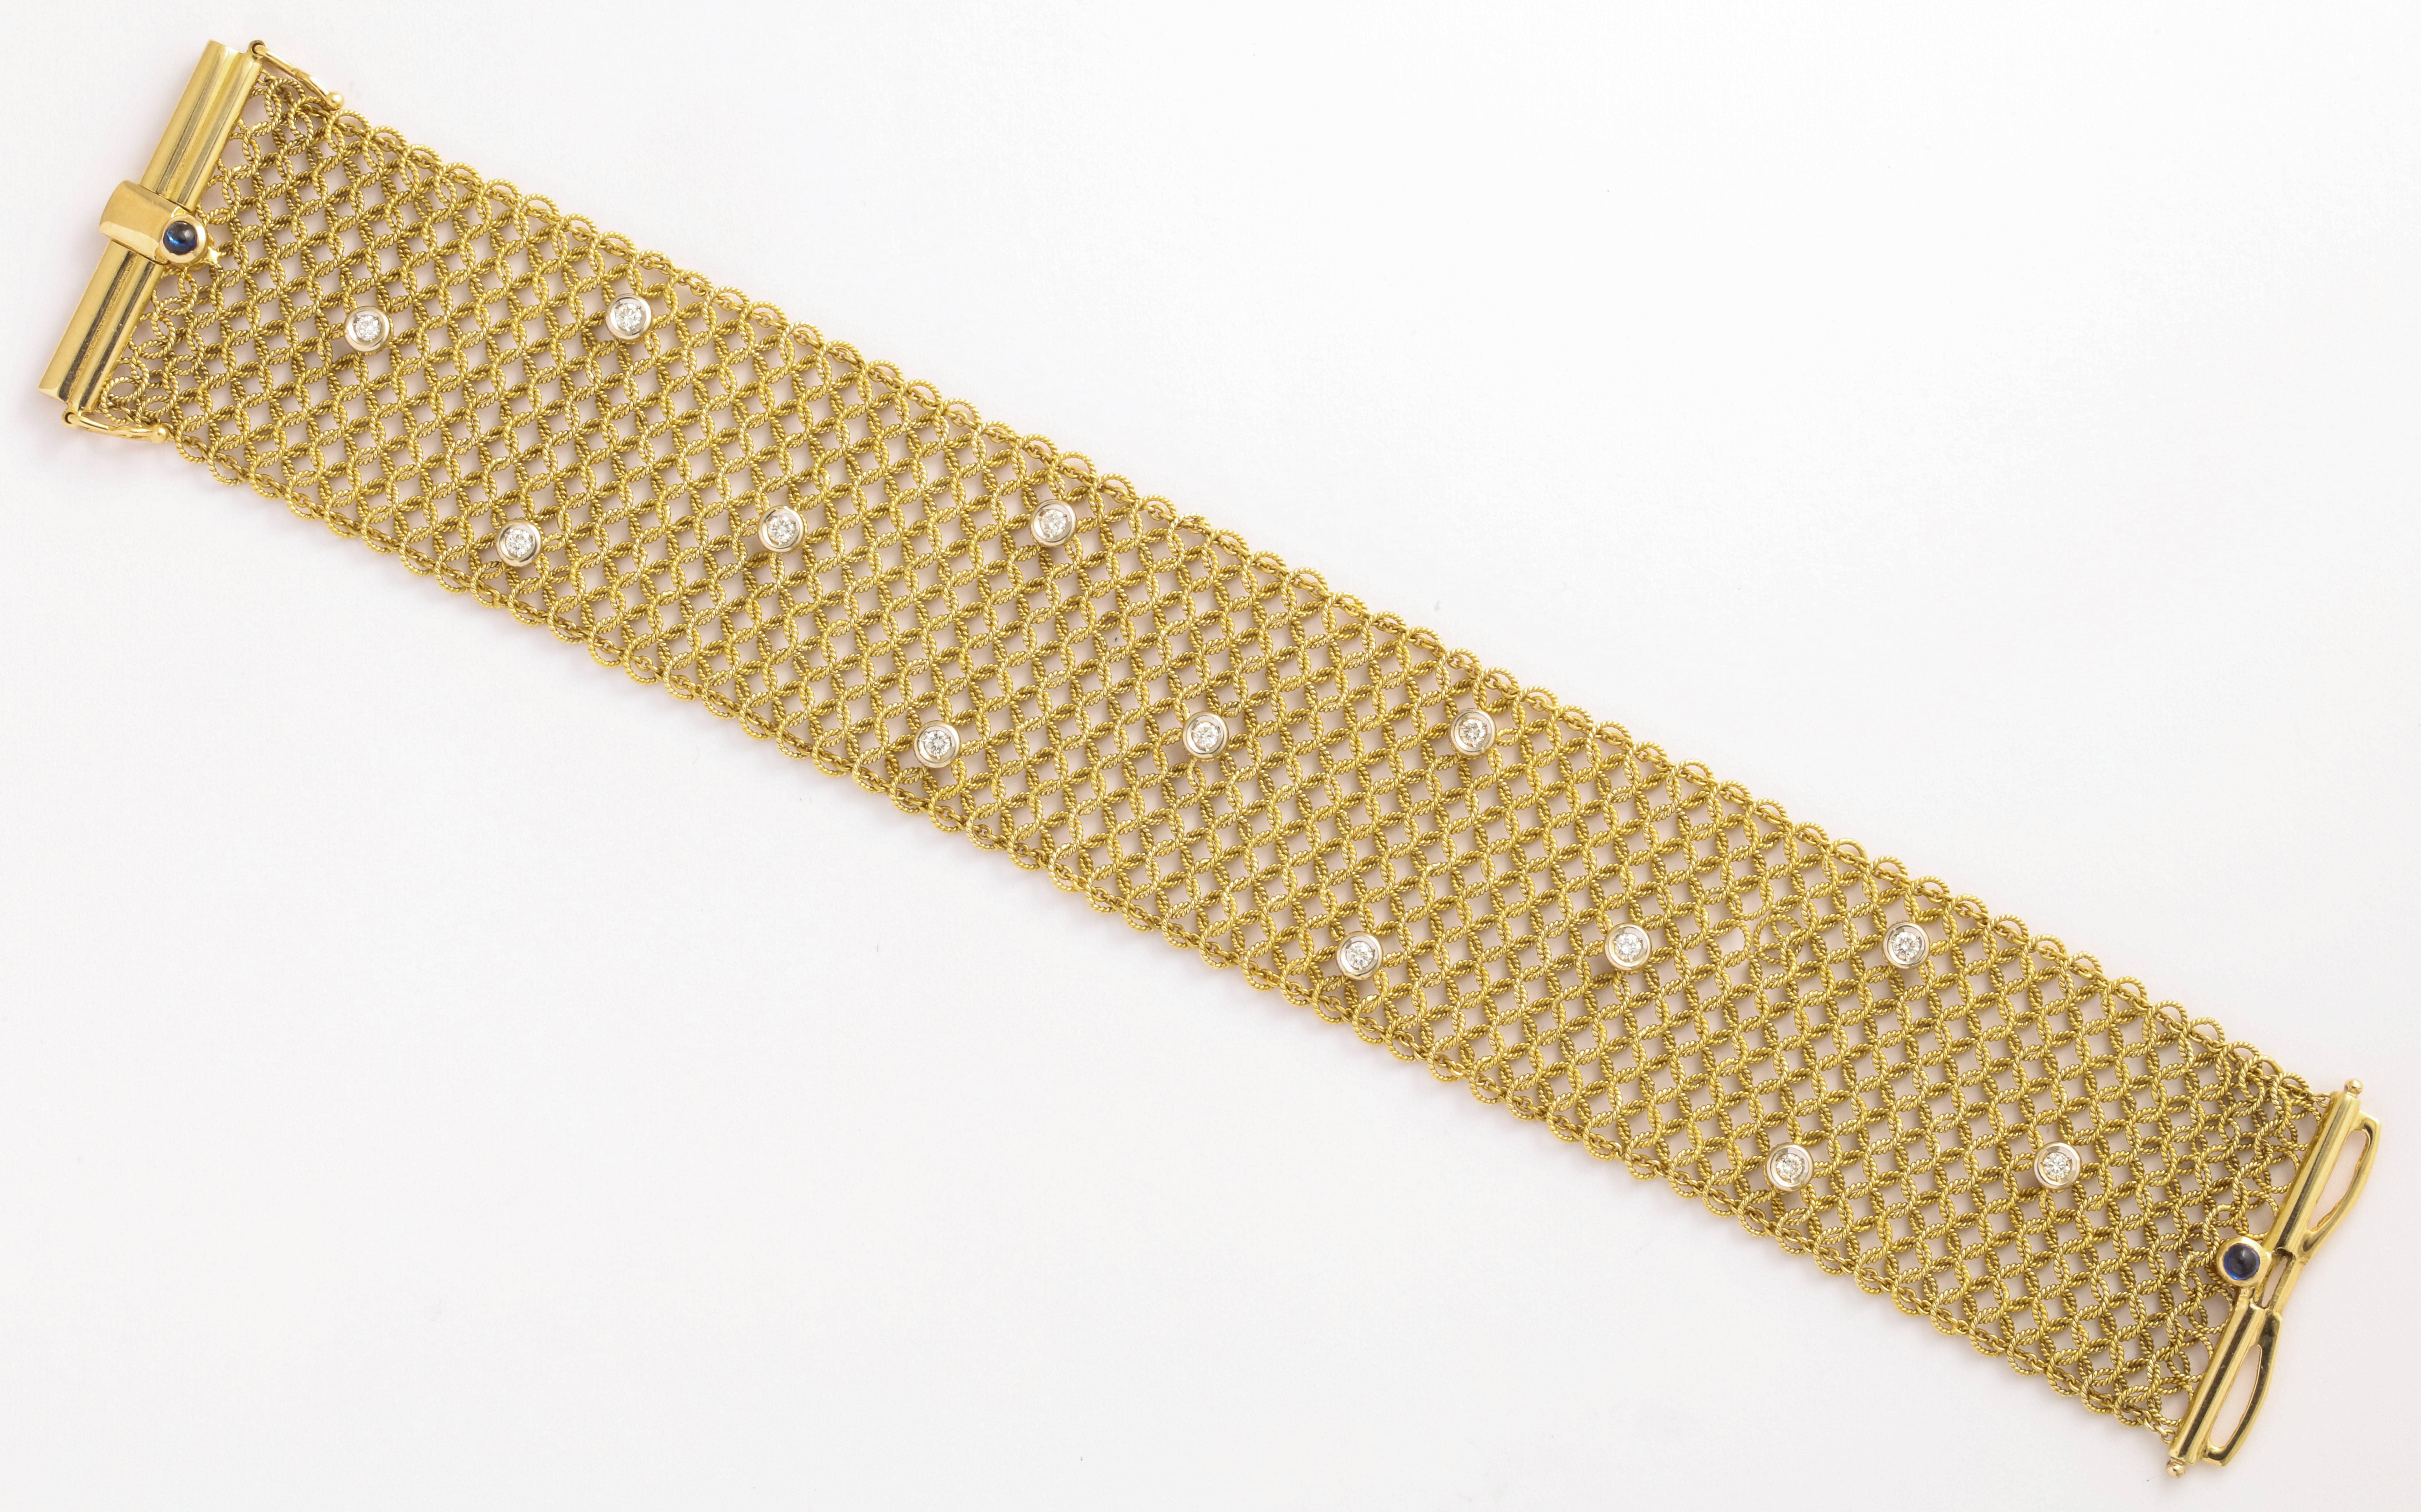 A woven 18 karat yellow gold bracelet set with round brilliant diamonds. Estimated diamond weight is 0.91 carats. Clasp set with two cabochon sapphires. Created by Tiffany and Co. 